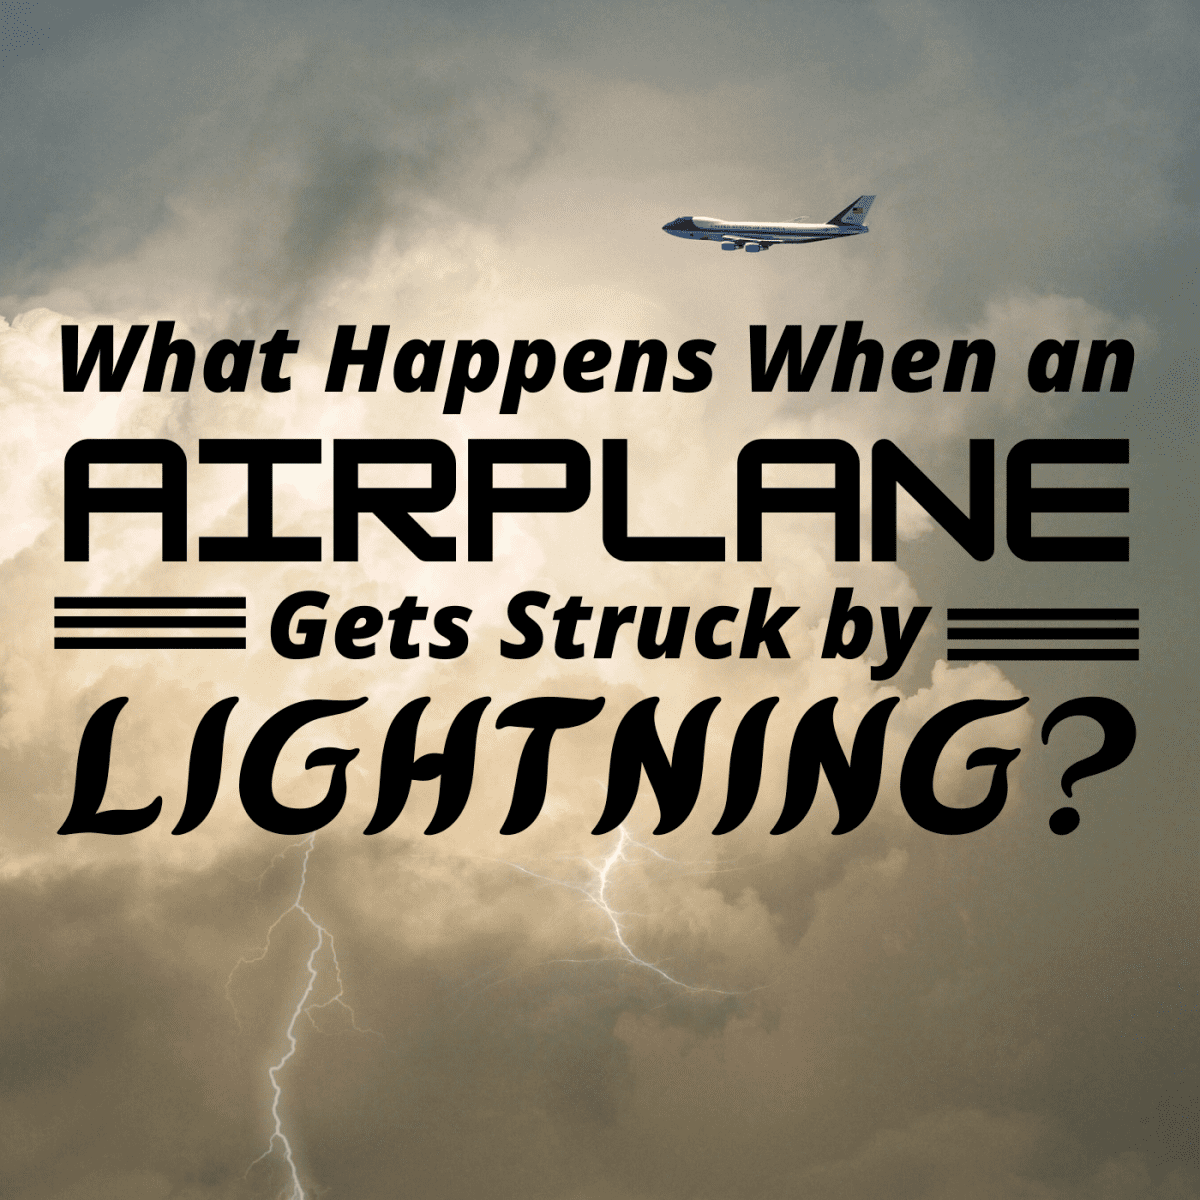 How Are Planes Protected From Lightning Strikes? - Owlcation